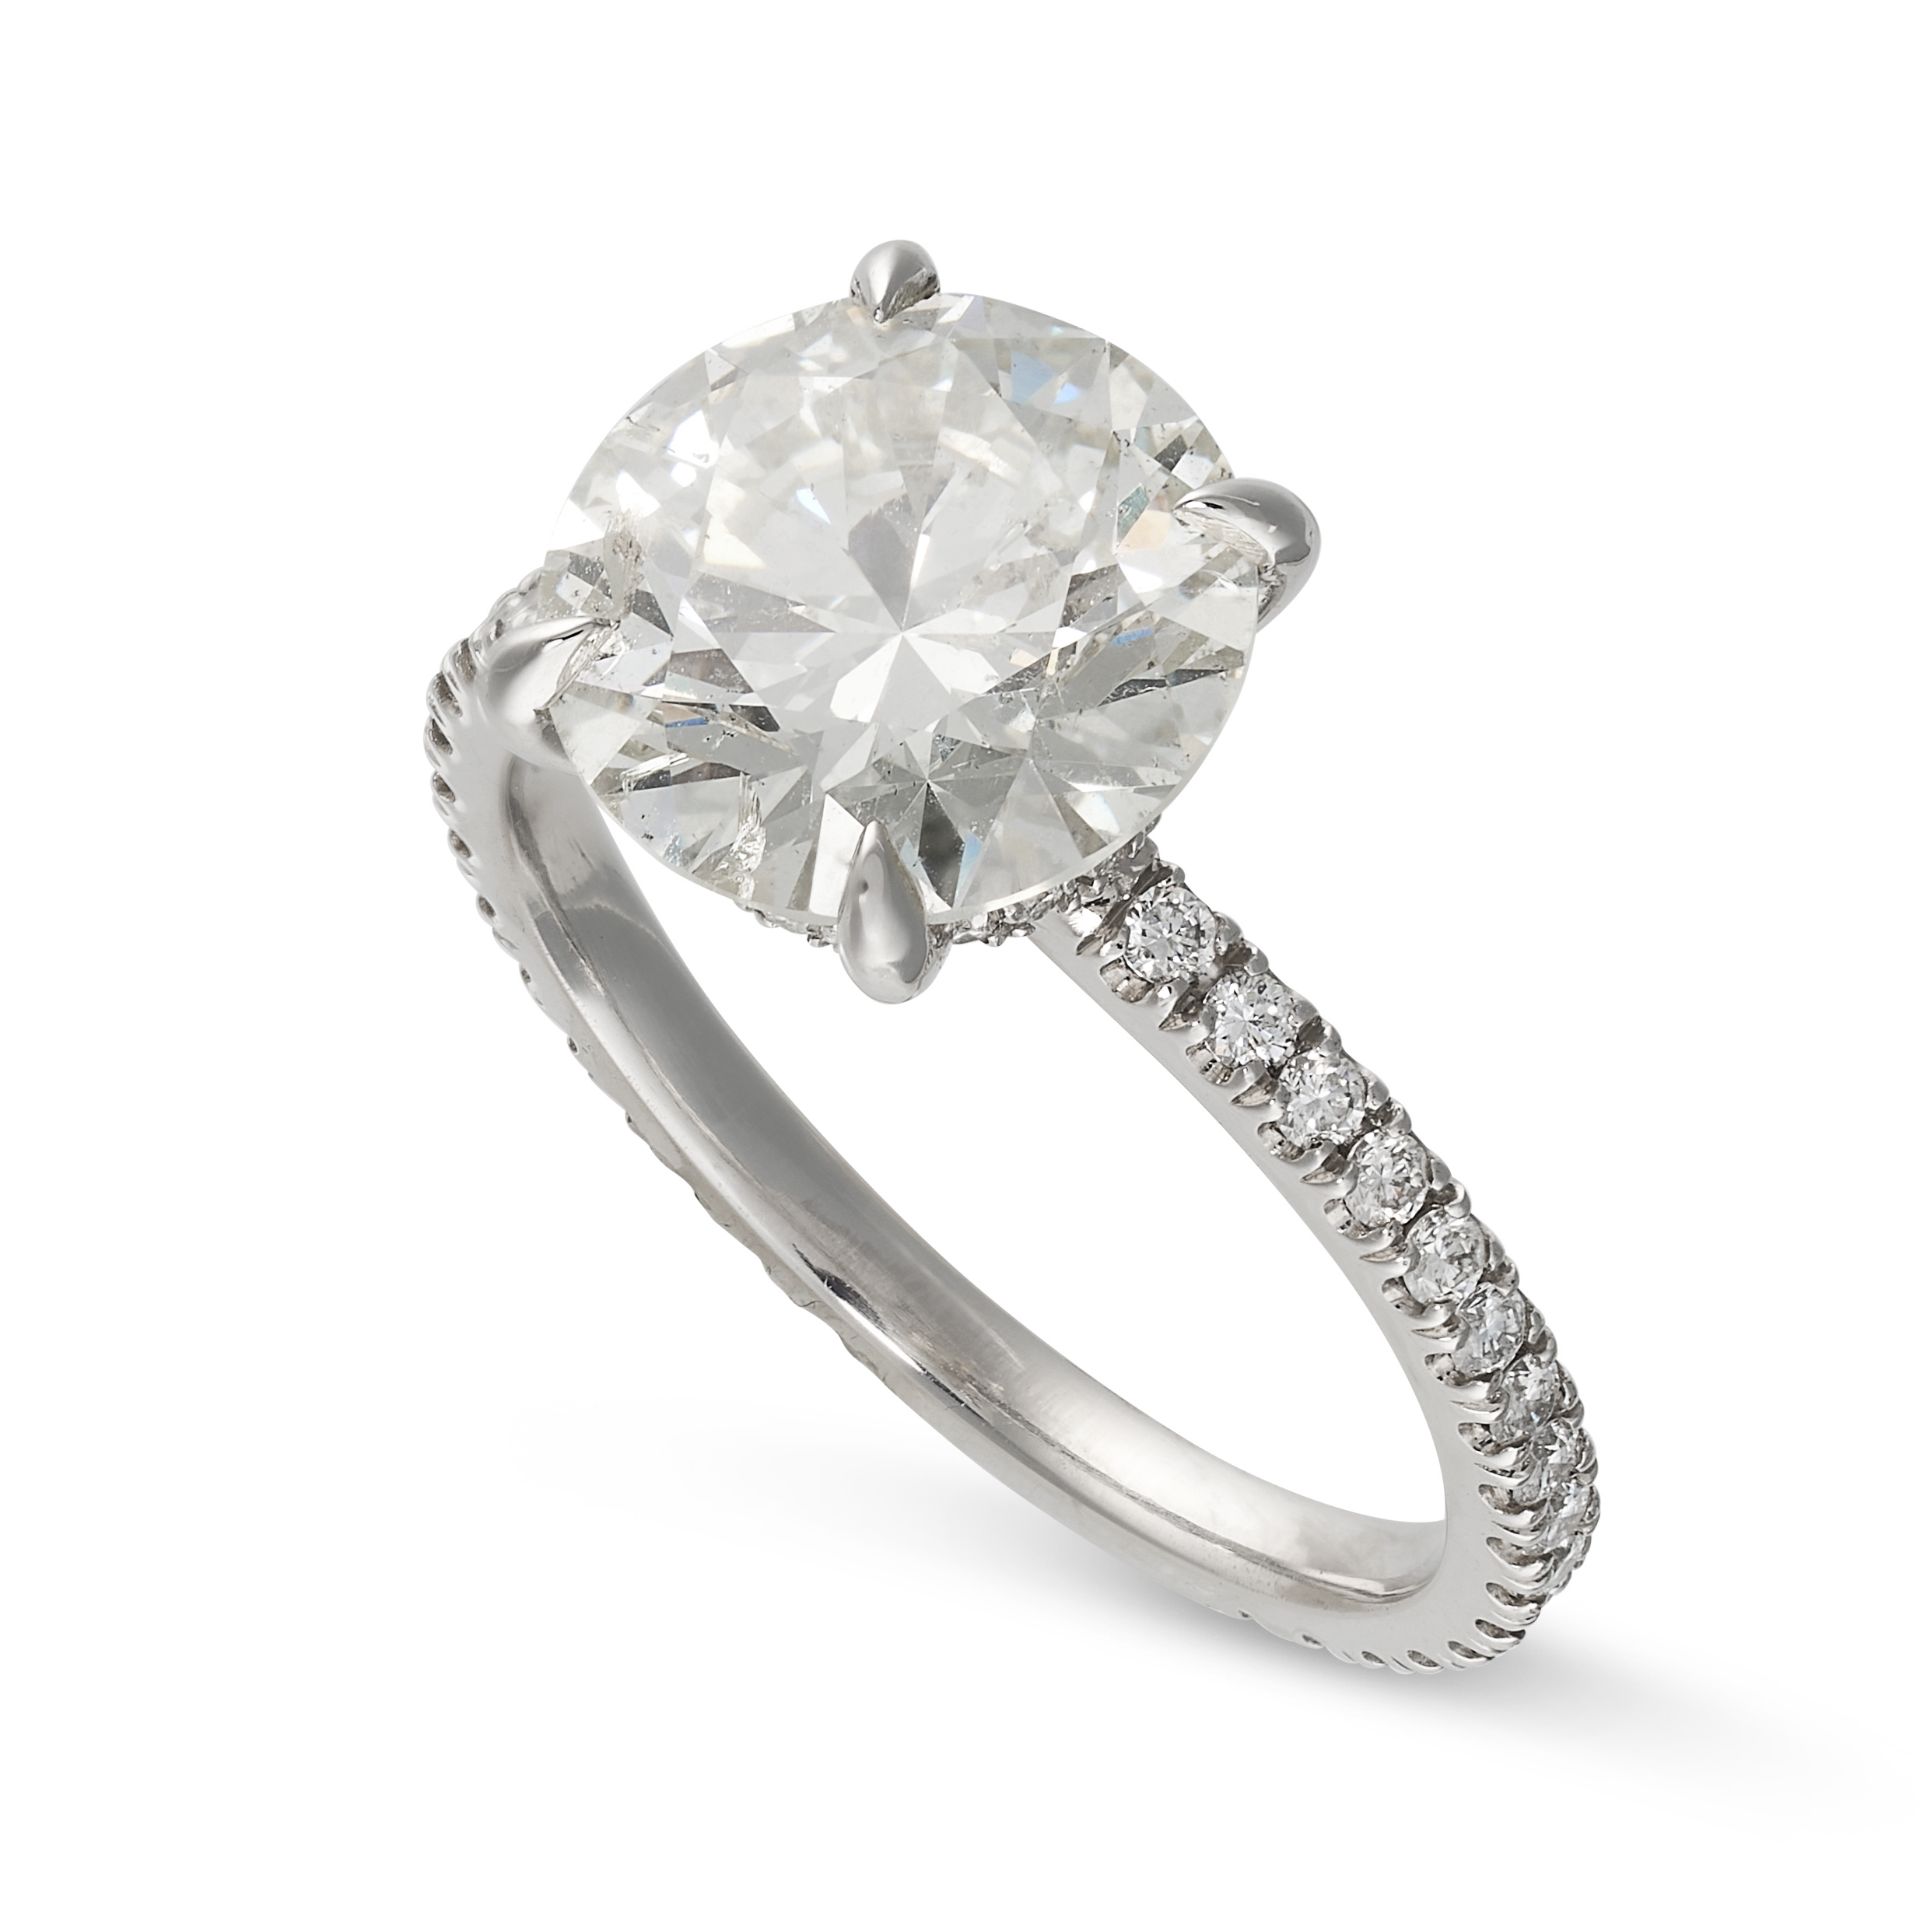 A SOLITAIRE DIAMOND ENGAGEMENT RING in platinum, set with a round brilliant cut diamond of - Image 2 of 2